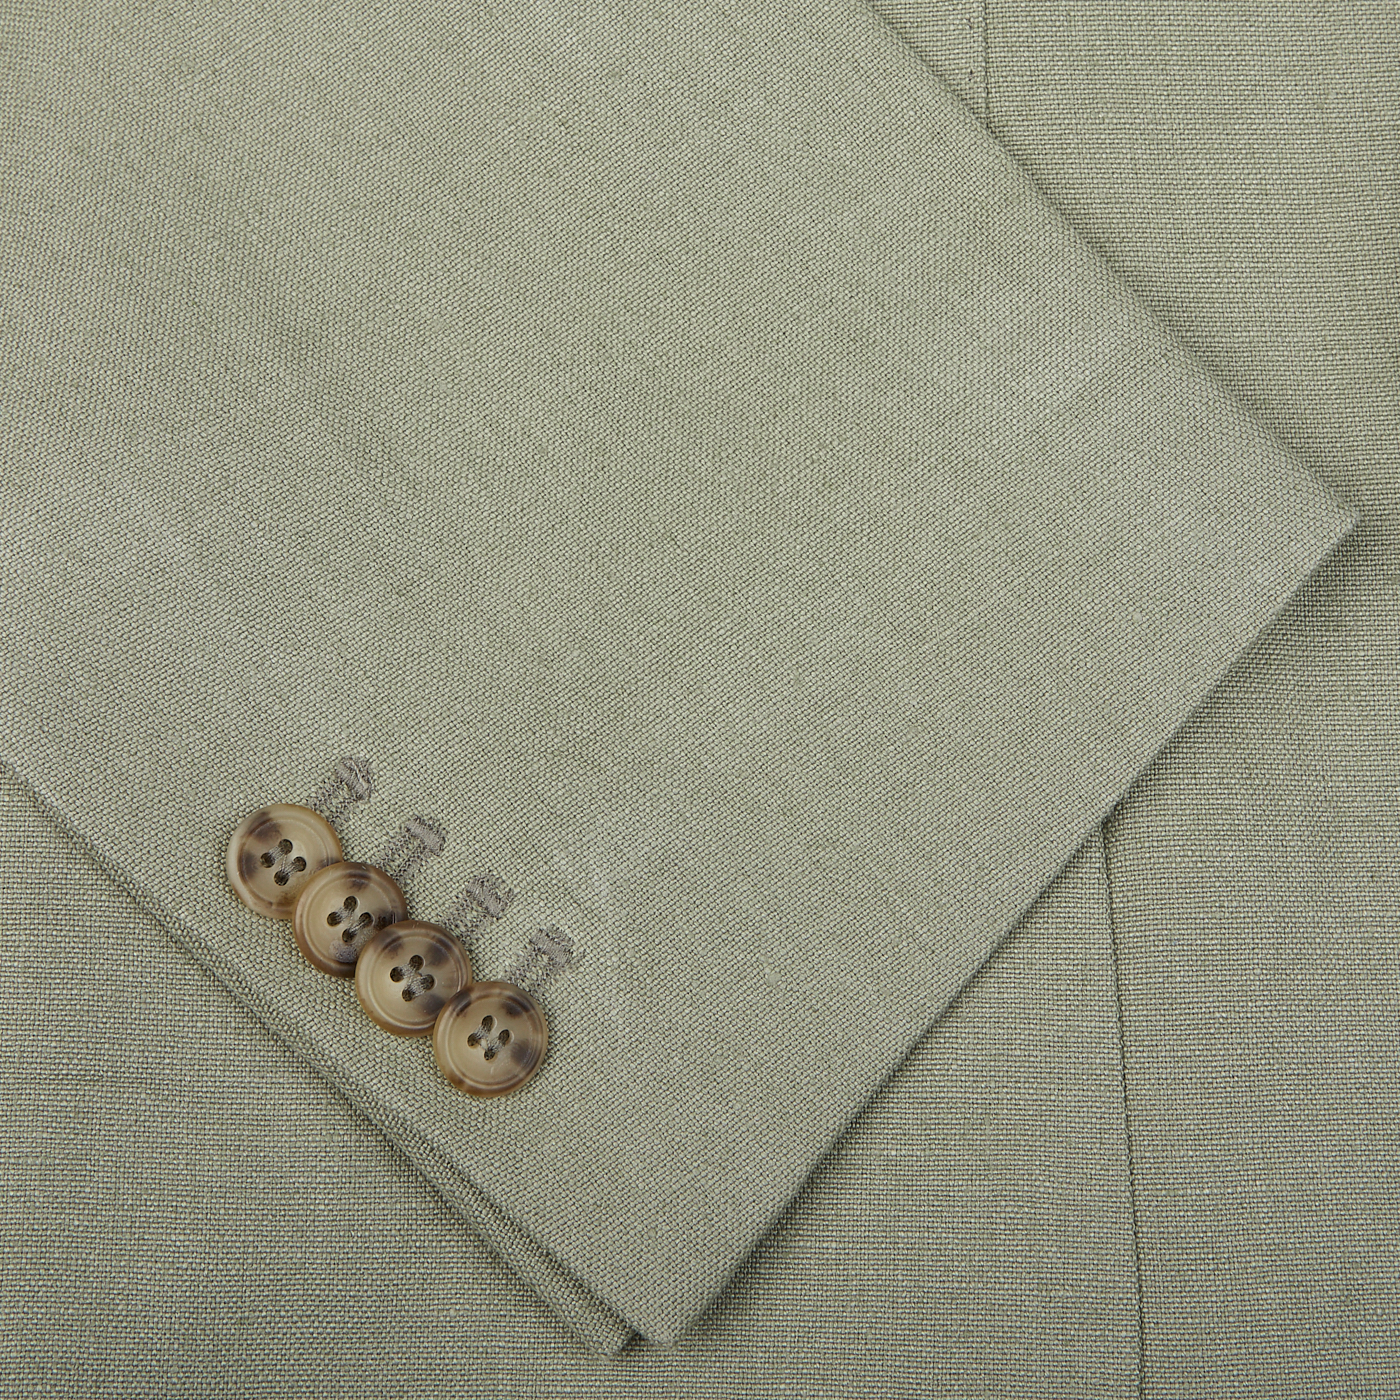 Close-up of a sage green Studio 73 suit sleeve with four brown buttons aligned near the cuff. The fabric texture is visibly woven, reflecting the quality of canapa hemp linen.